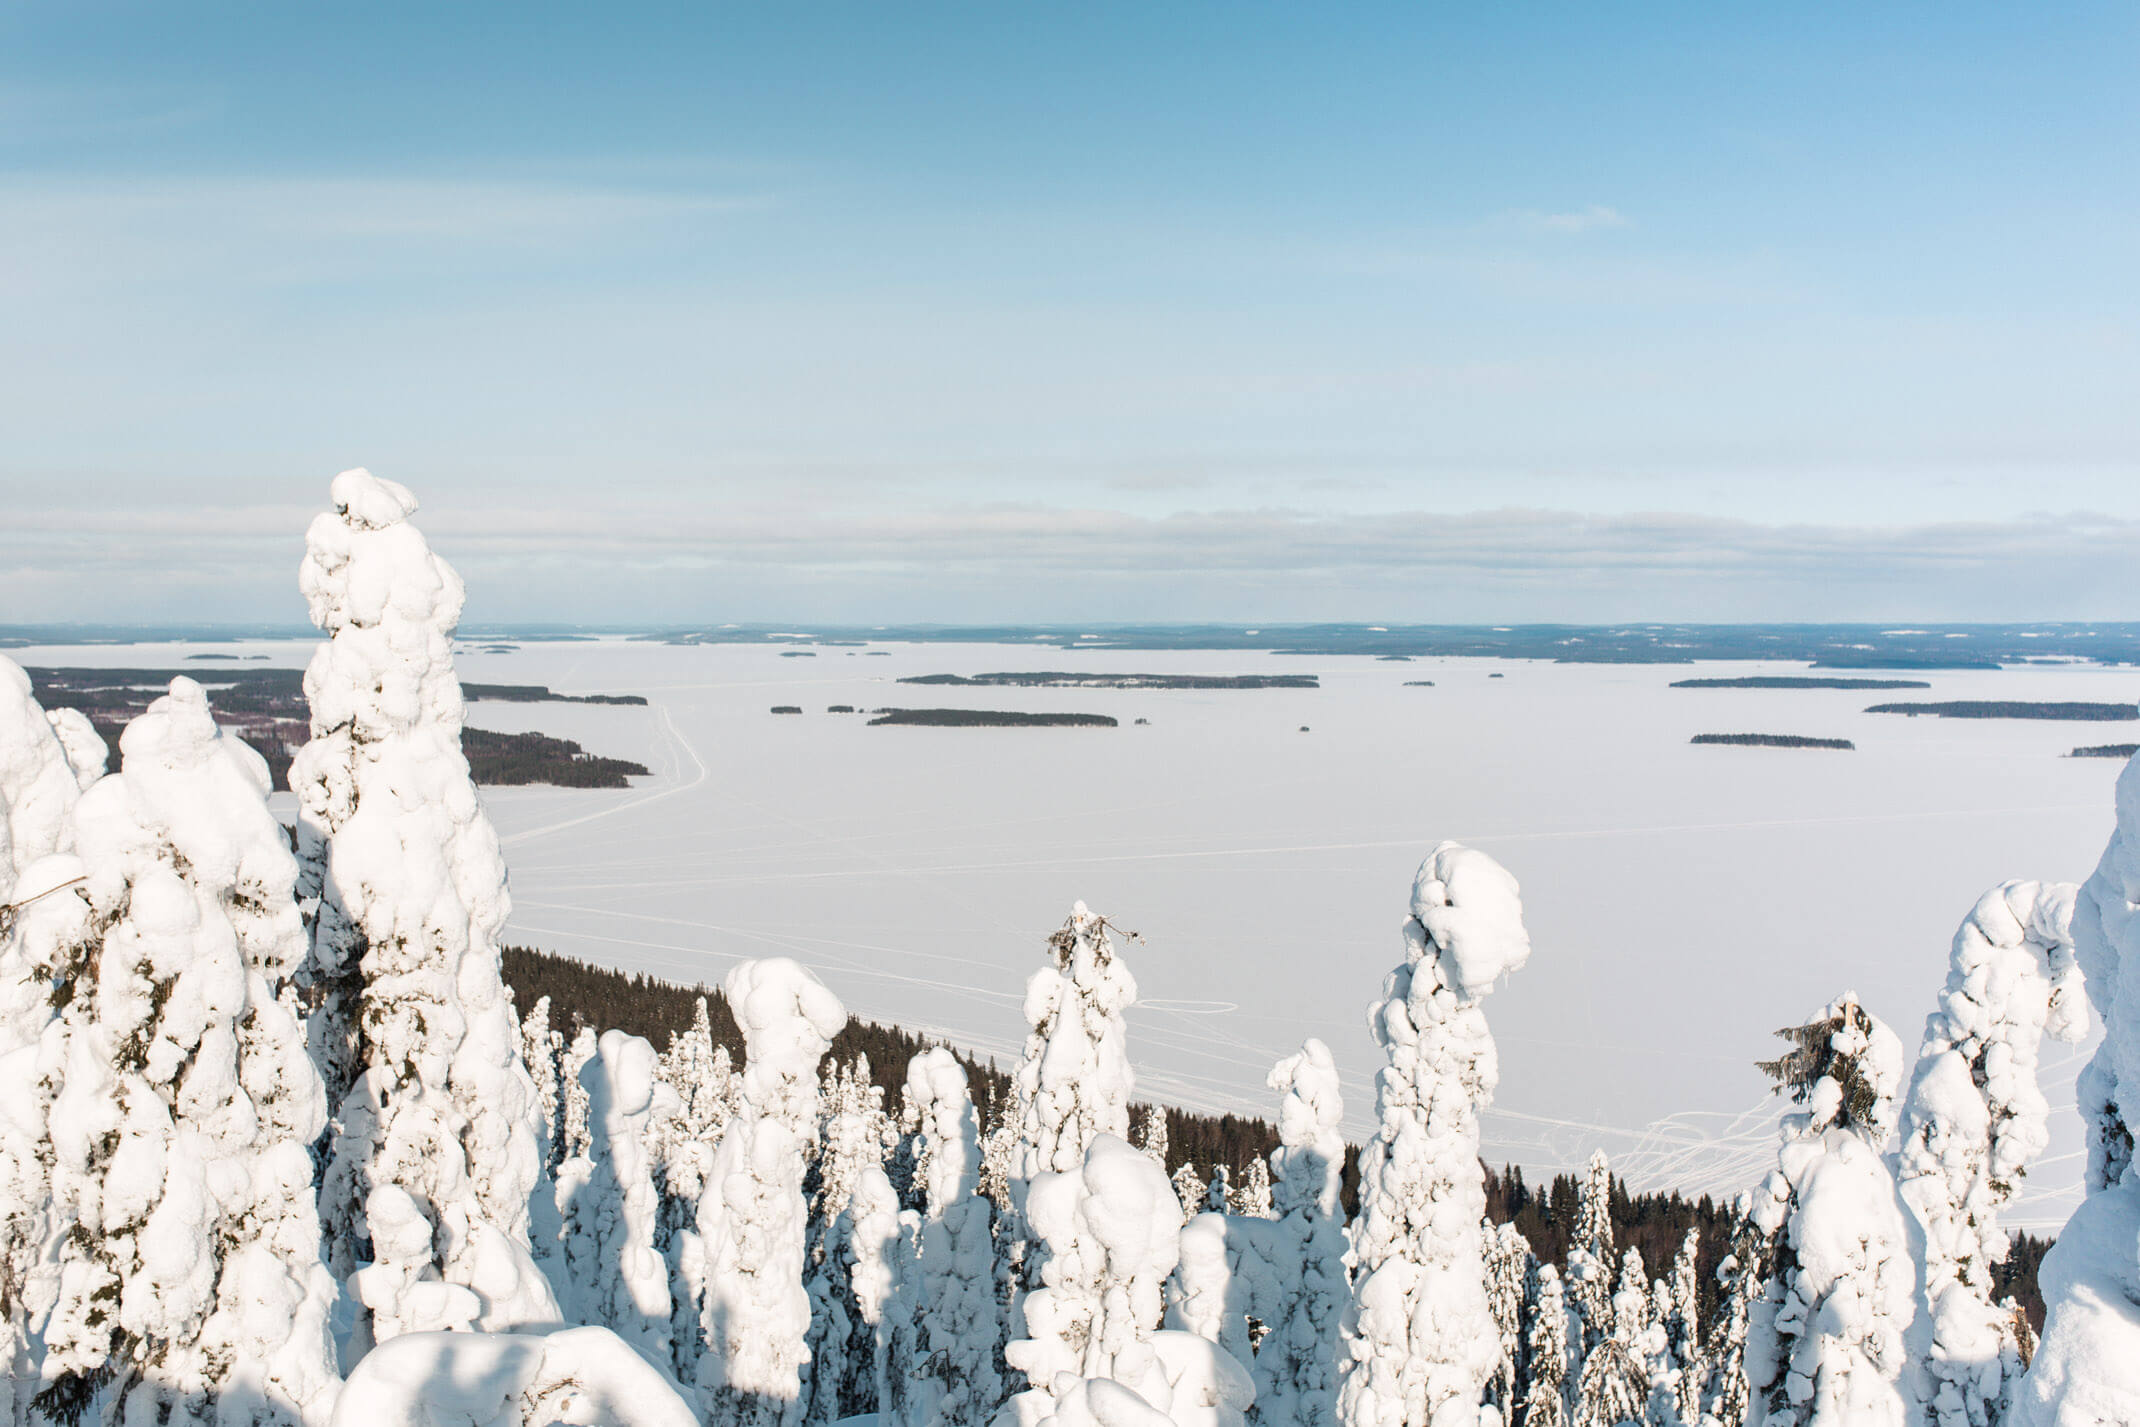 4 days in Finland: Driving the Koli Ice road and Koli National Park